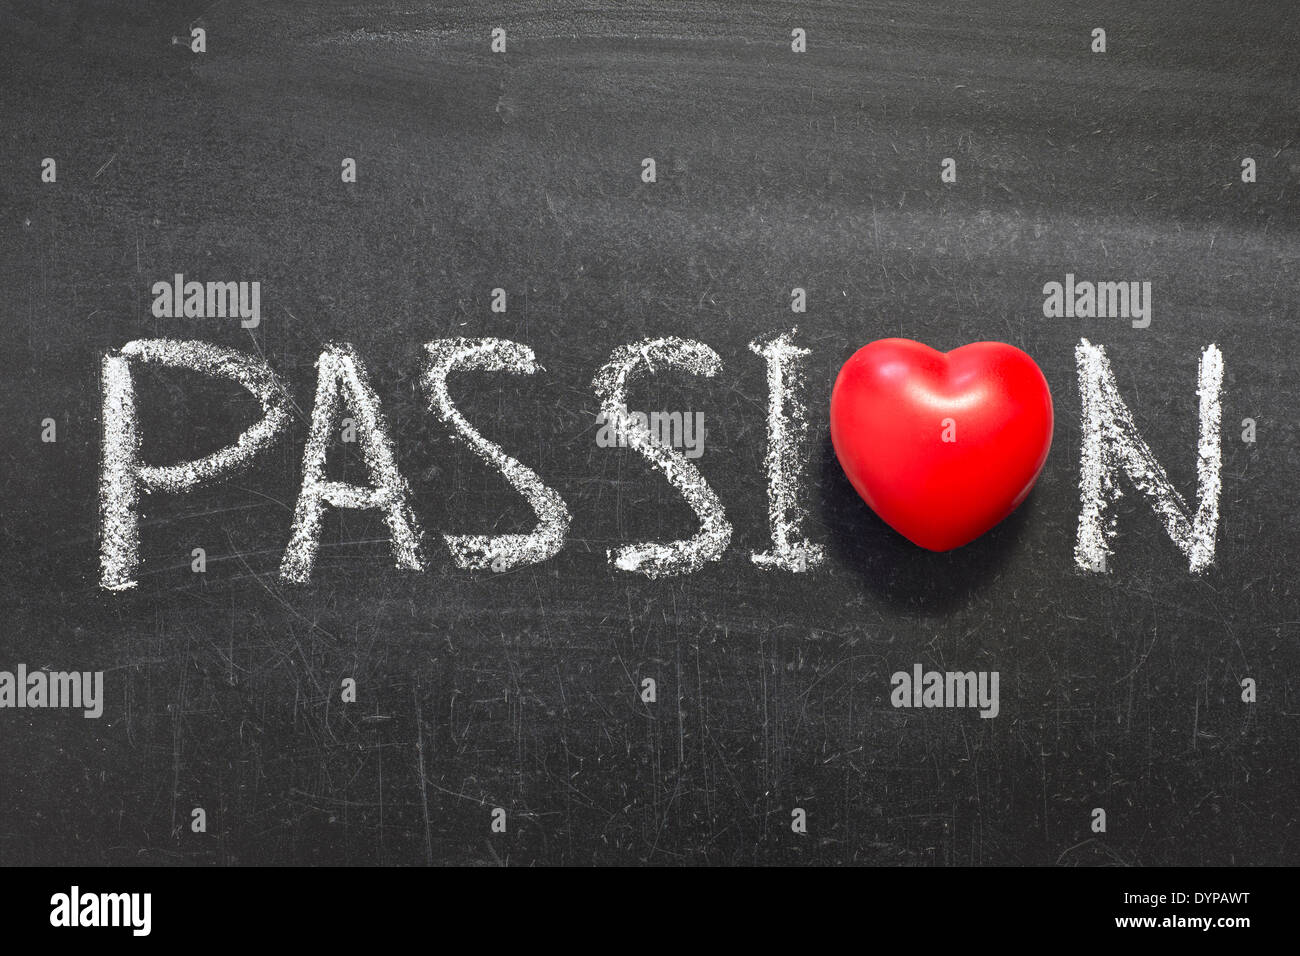 passion word handwritten on chalkboard with heart symbol instead of O Stock Photo